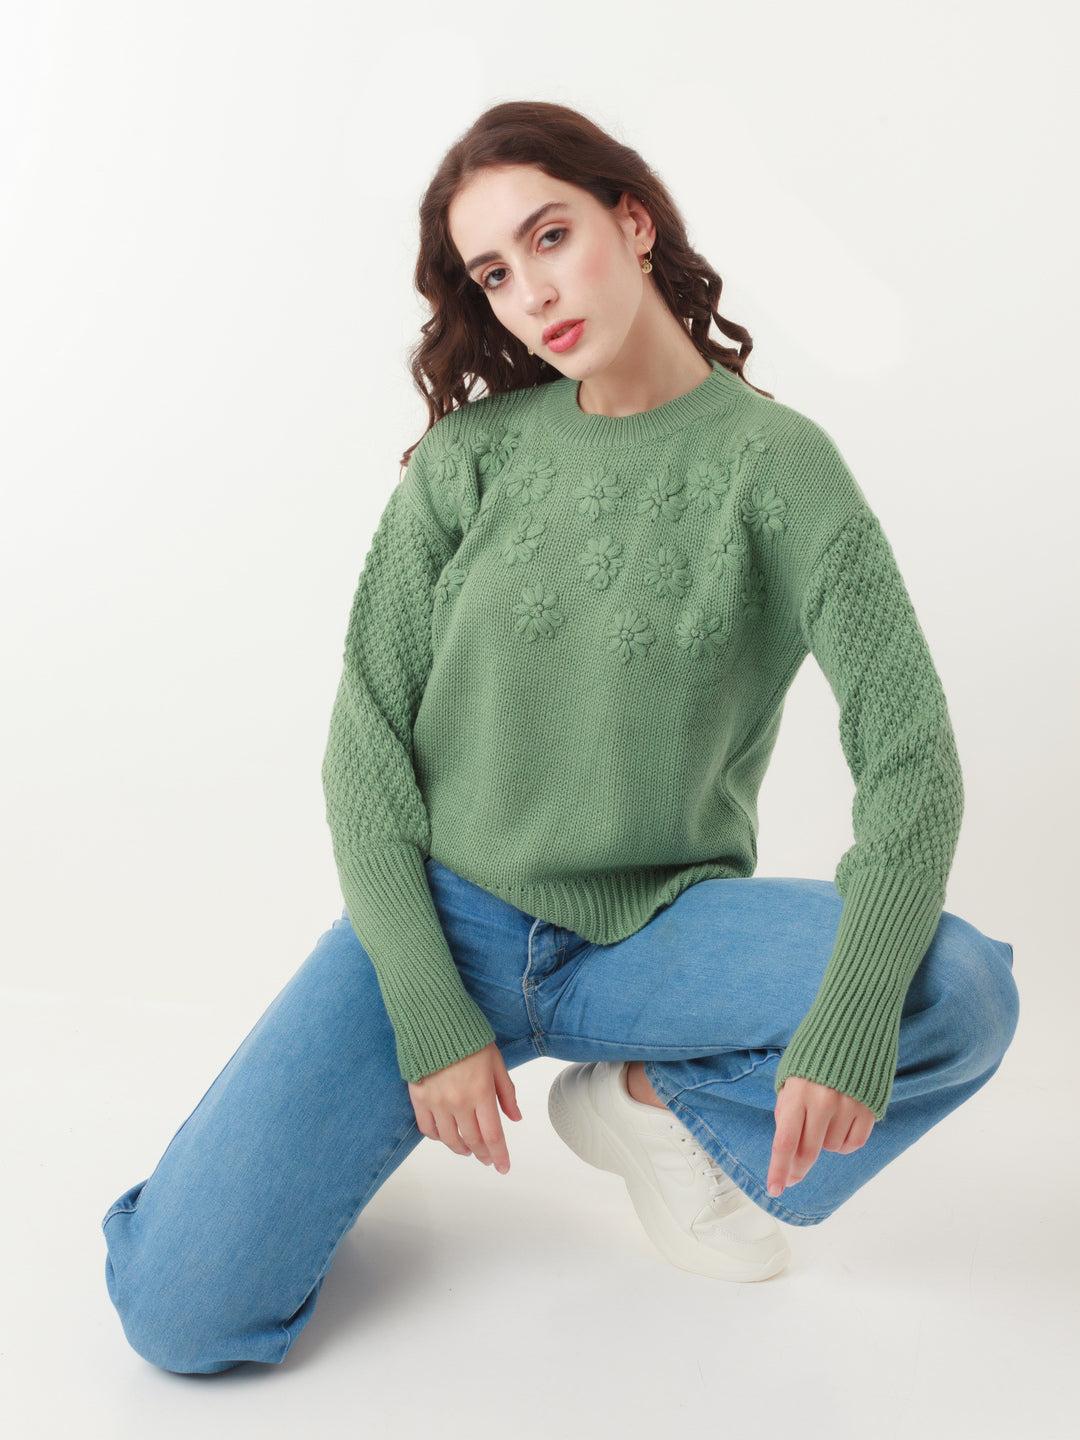 Green Embroidered Sweater For Women